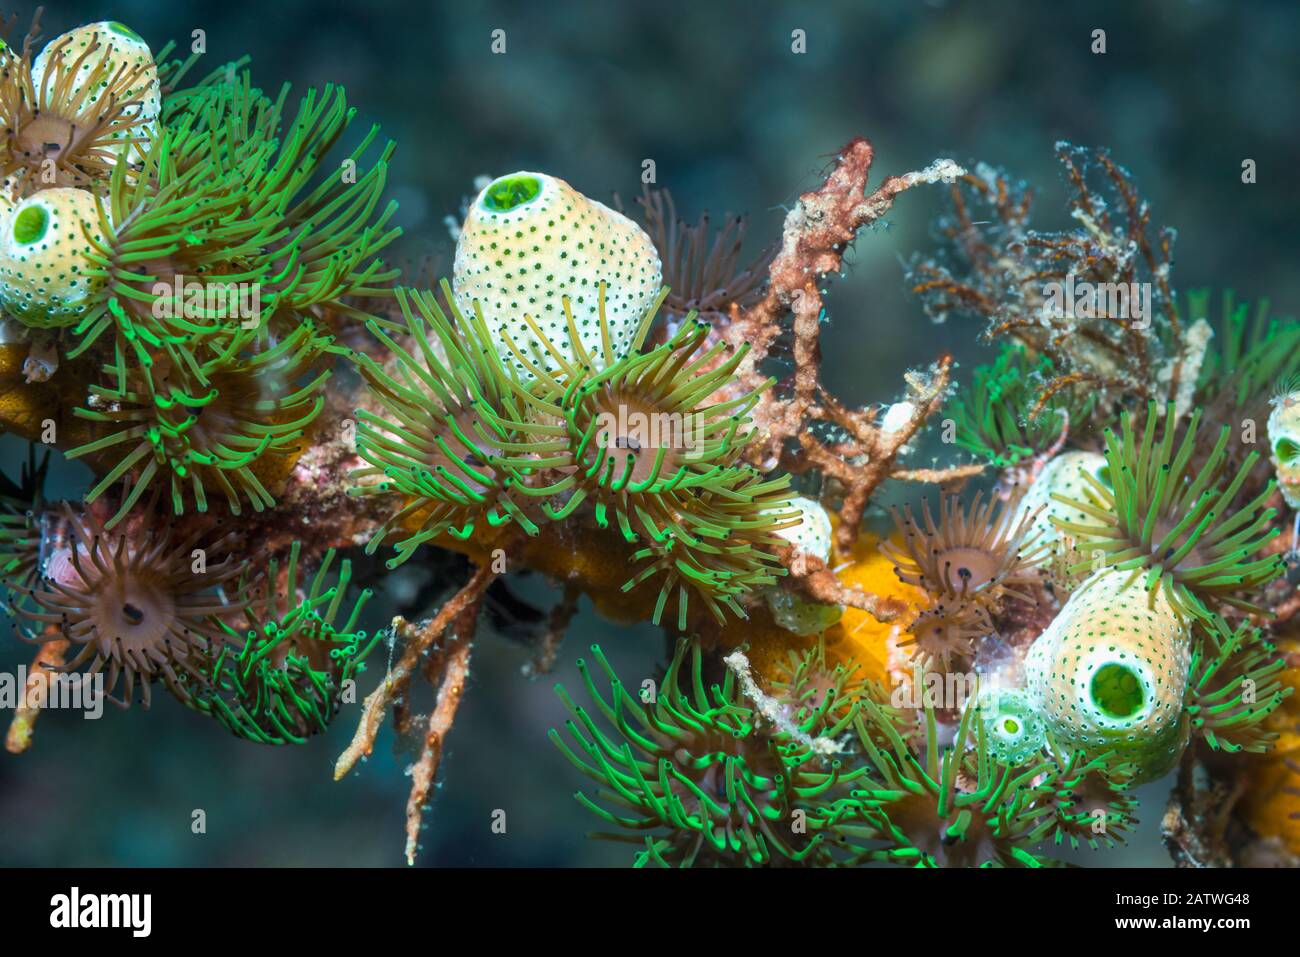 Colonial anemones (Amphianthus nitidus) with Green urn sea squirts (Didemnum molle) (Atriolum robustum). Lembeh Strait, North Sulawesi, Indonesia. Stock Photo